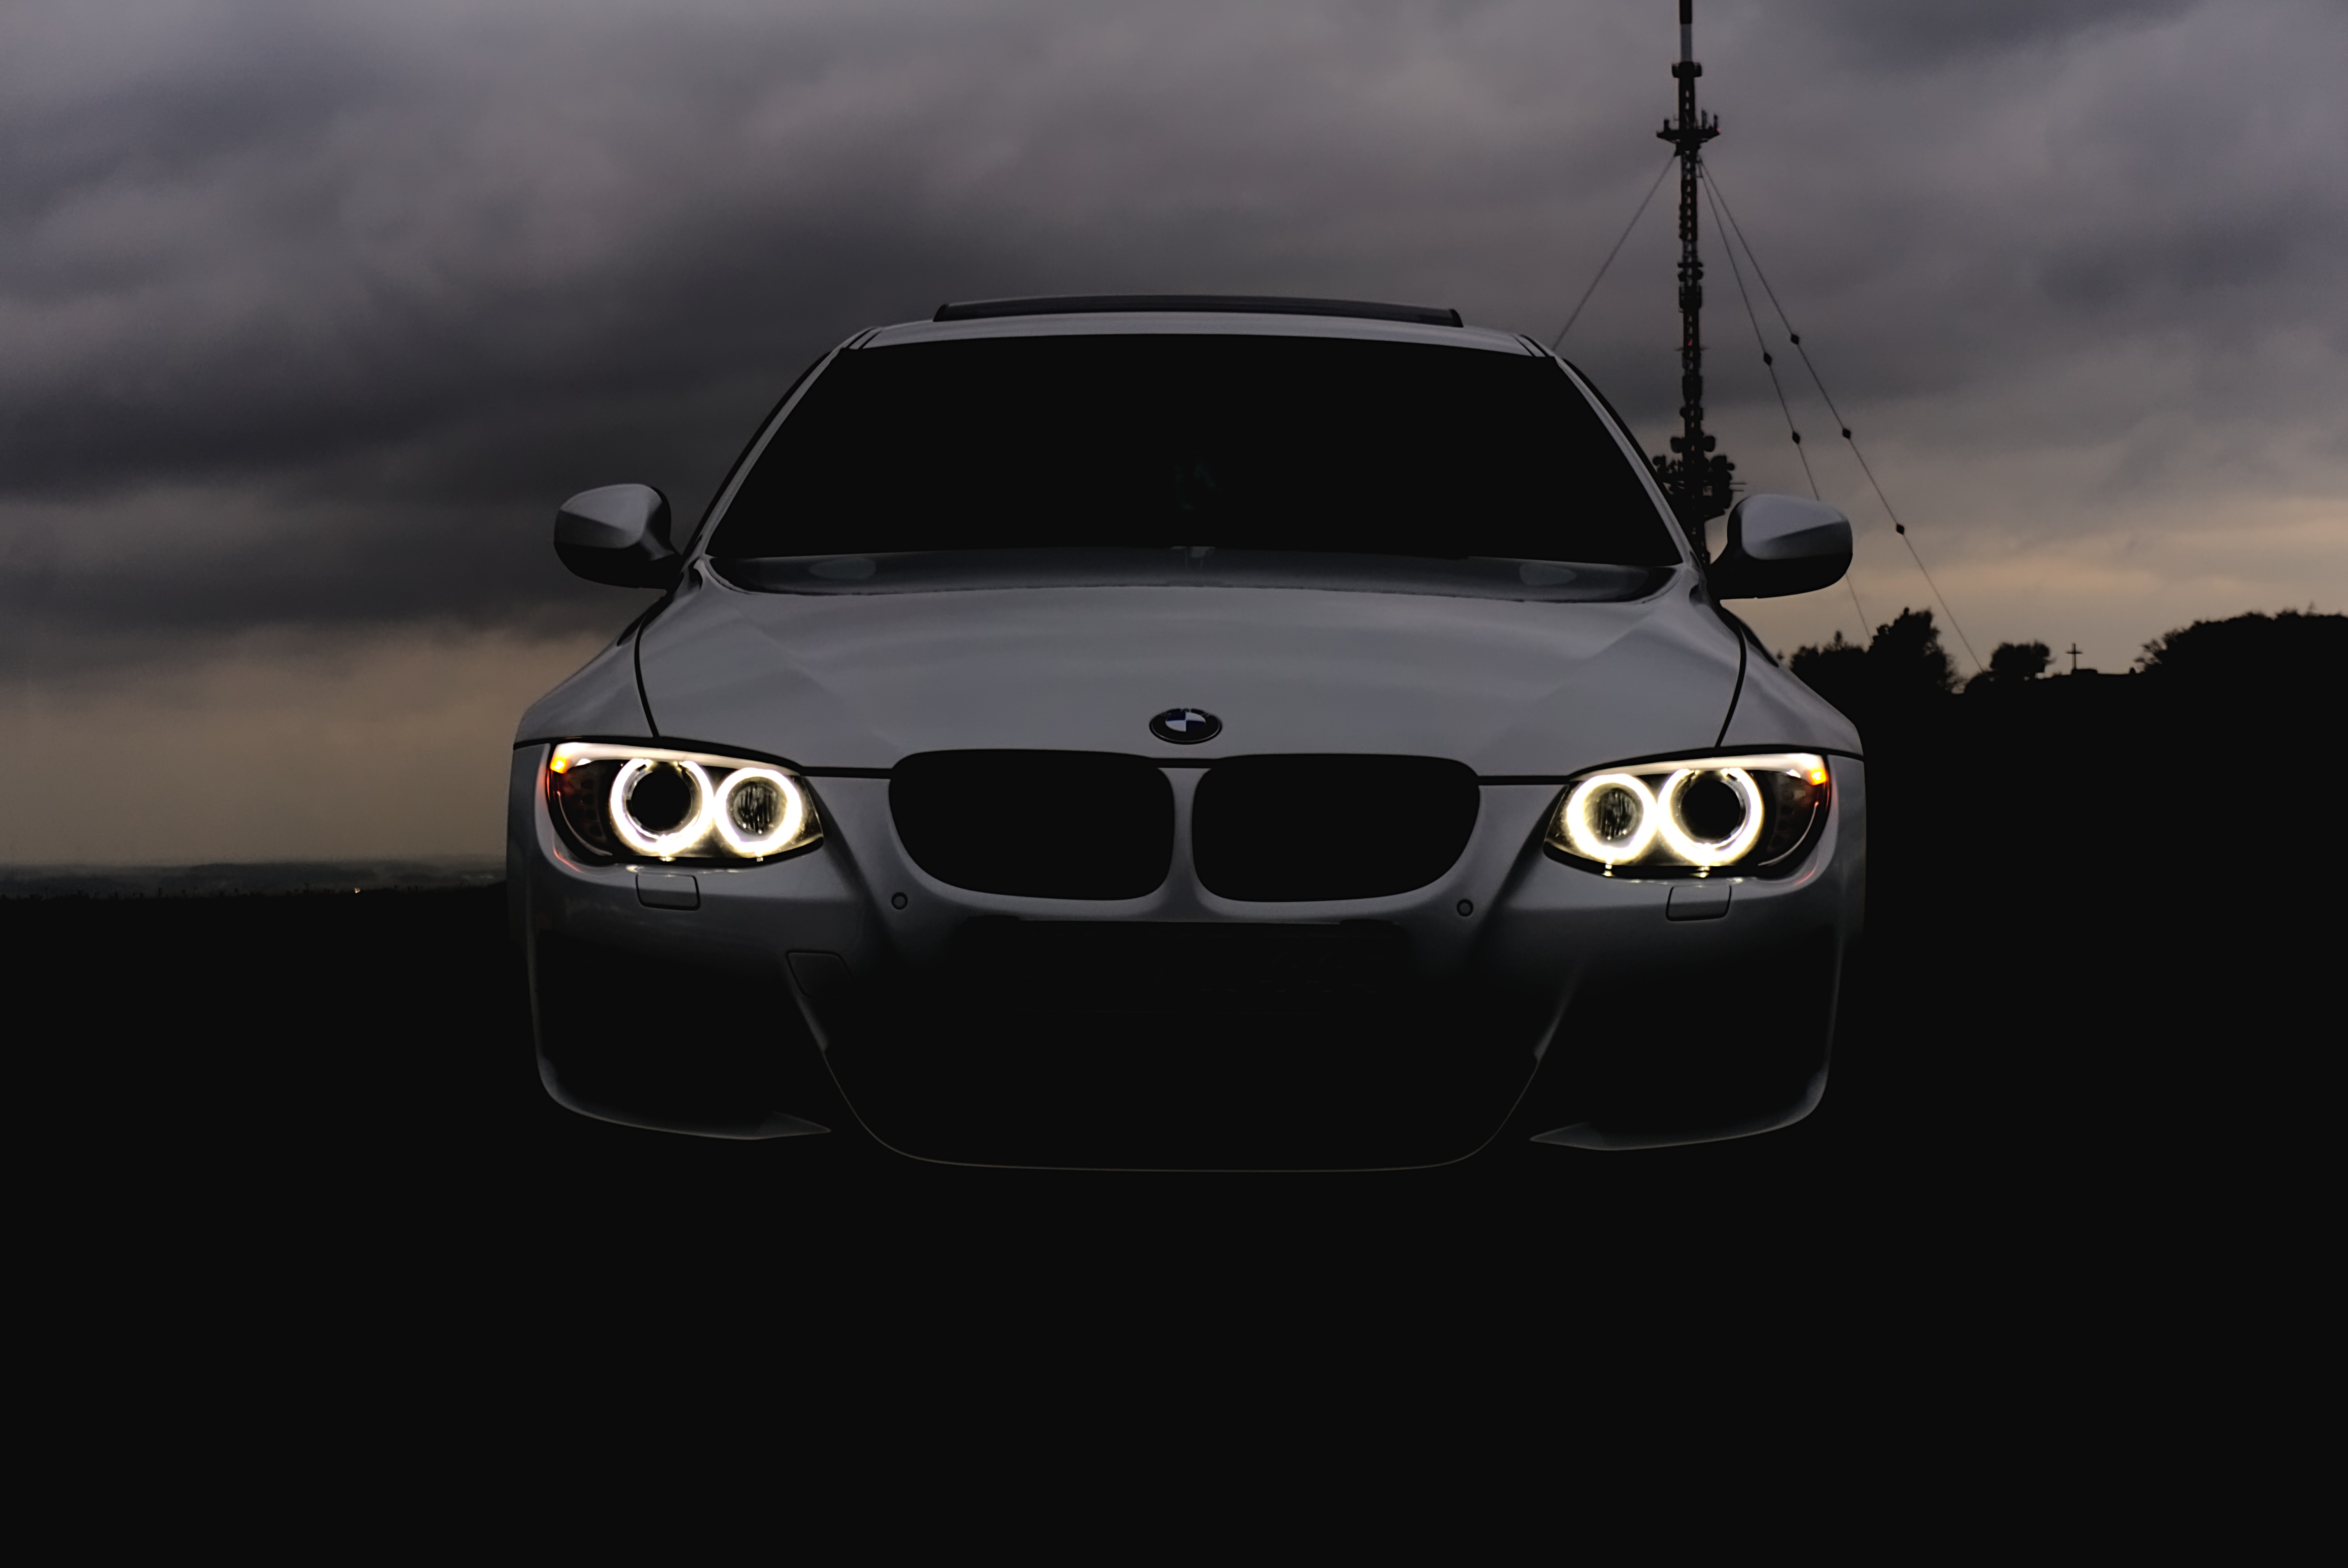 Lock Screen PC Wallpaper car, bmw, cars, clouds, lights, mainly cloudy, overcast, headlights